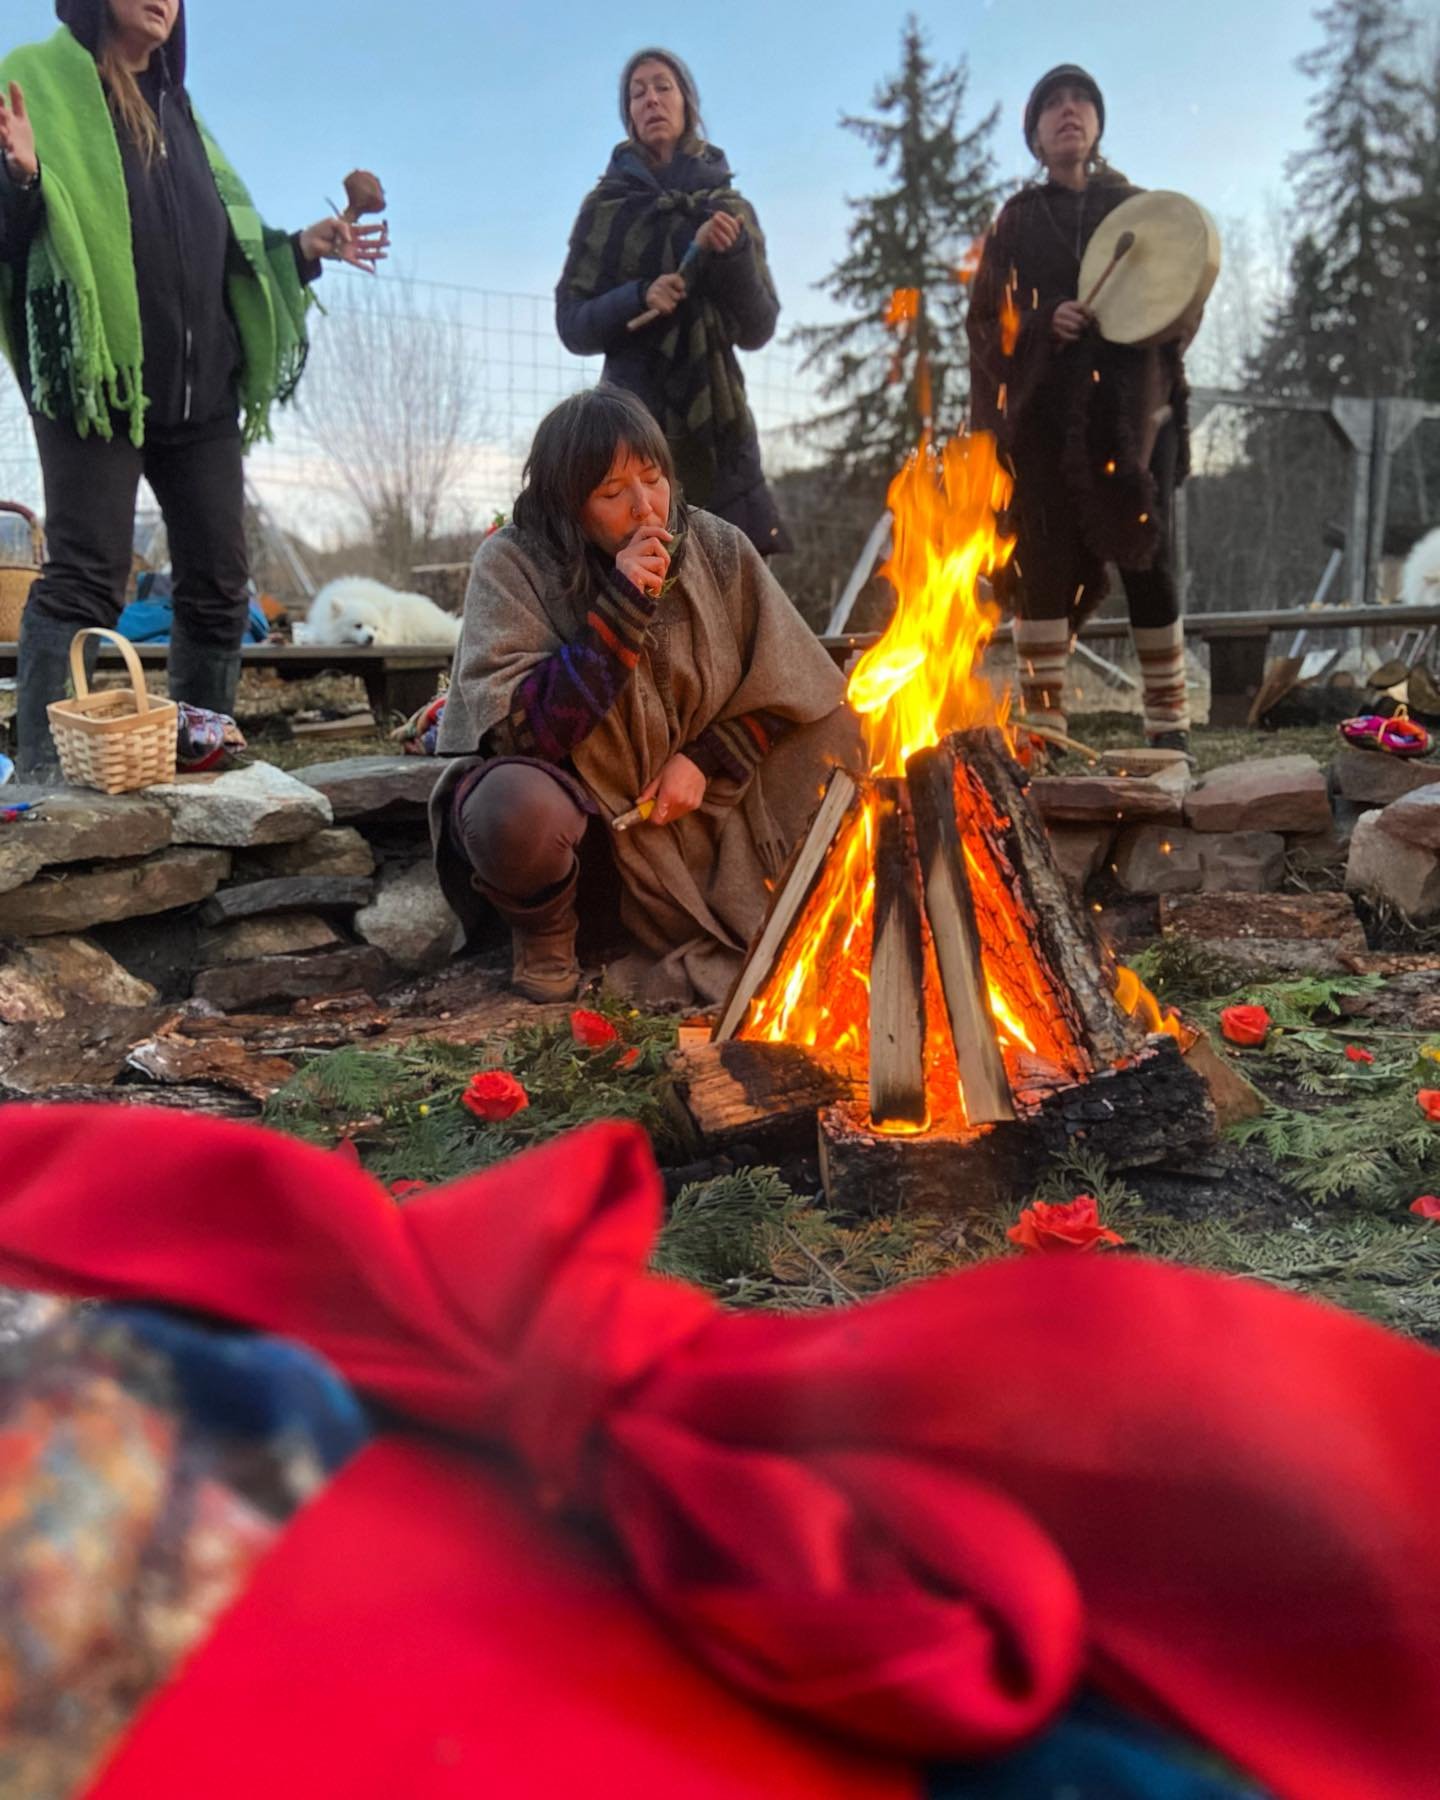 Fire Ceremony | Transformation

She quietly prays to the spirit of the flames, 
She bares her soul to become naked to Spirit.

Driving force for transformation,
a release into the fire. 

She breathes her prayers into the offerings,
 A uniting of a t